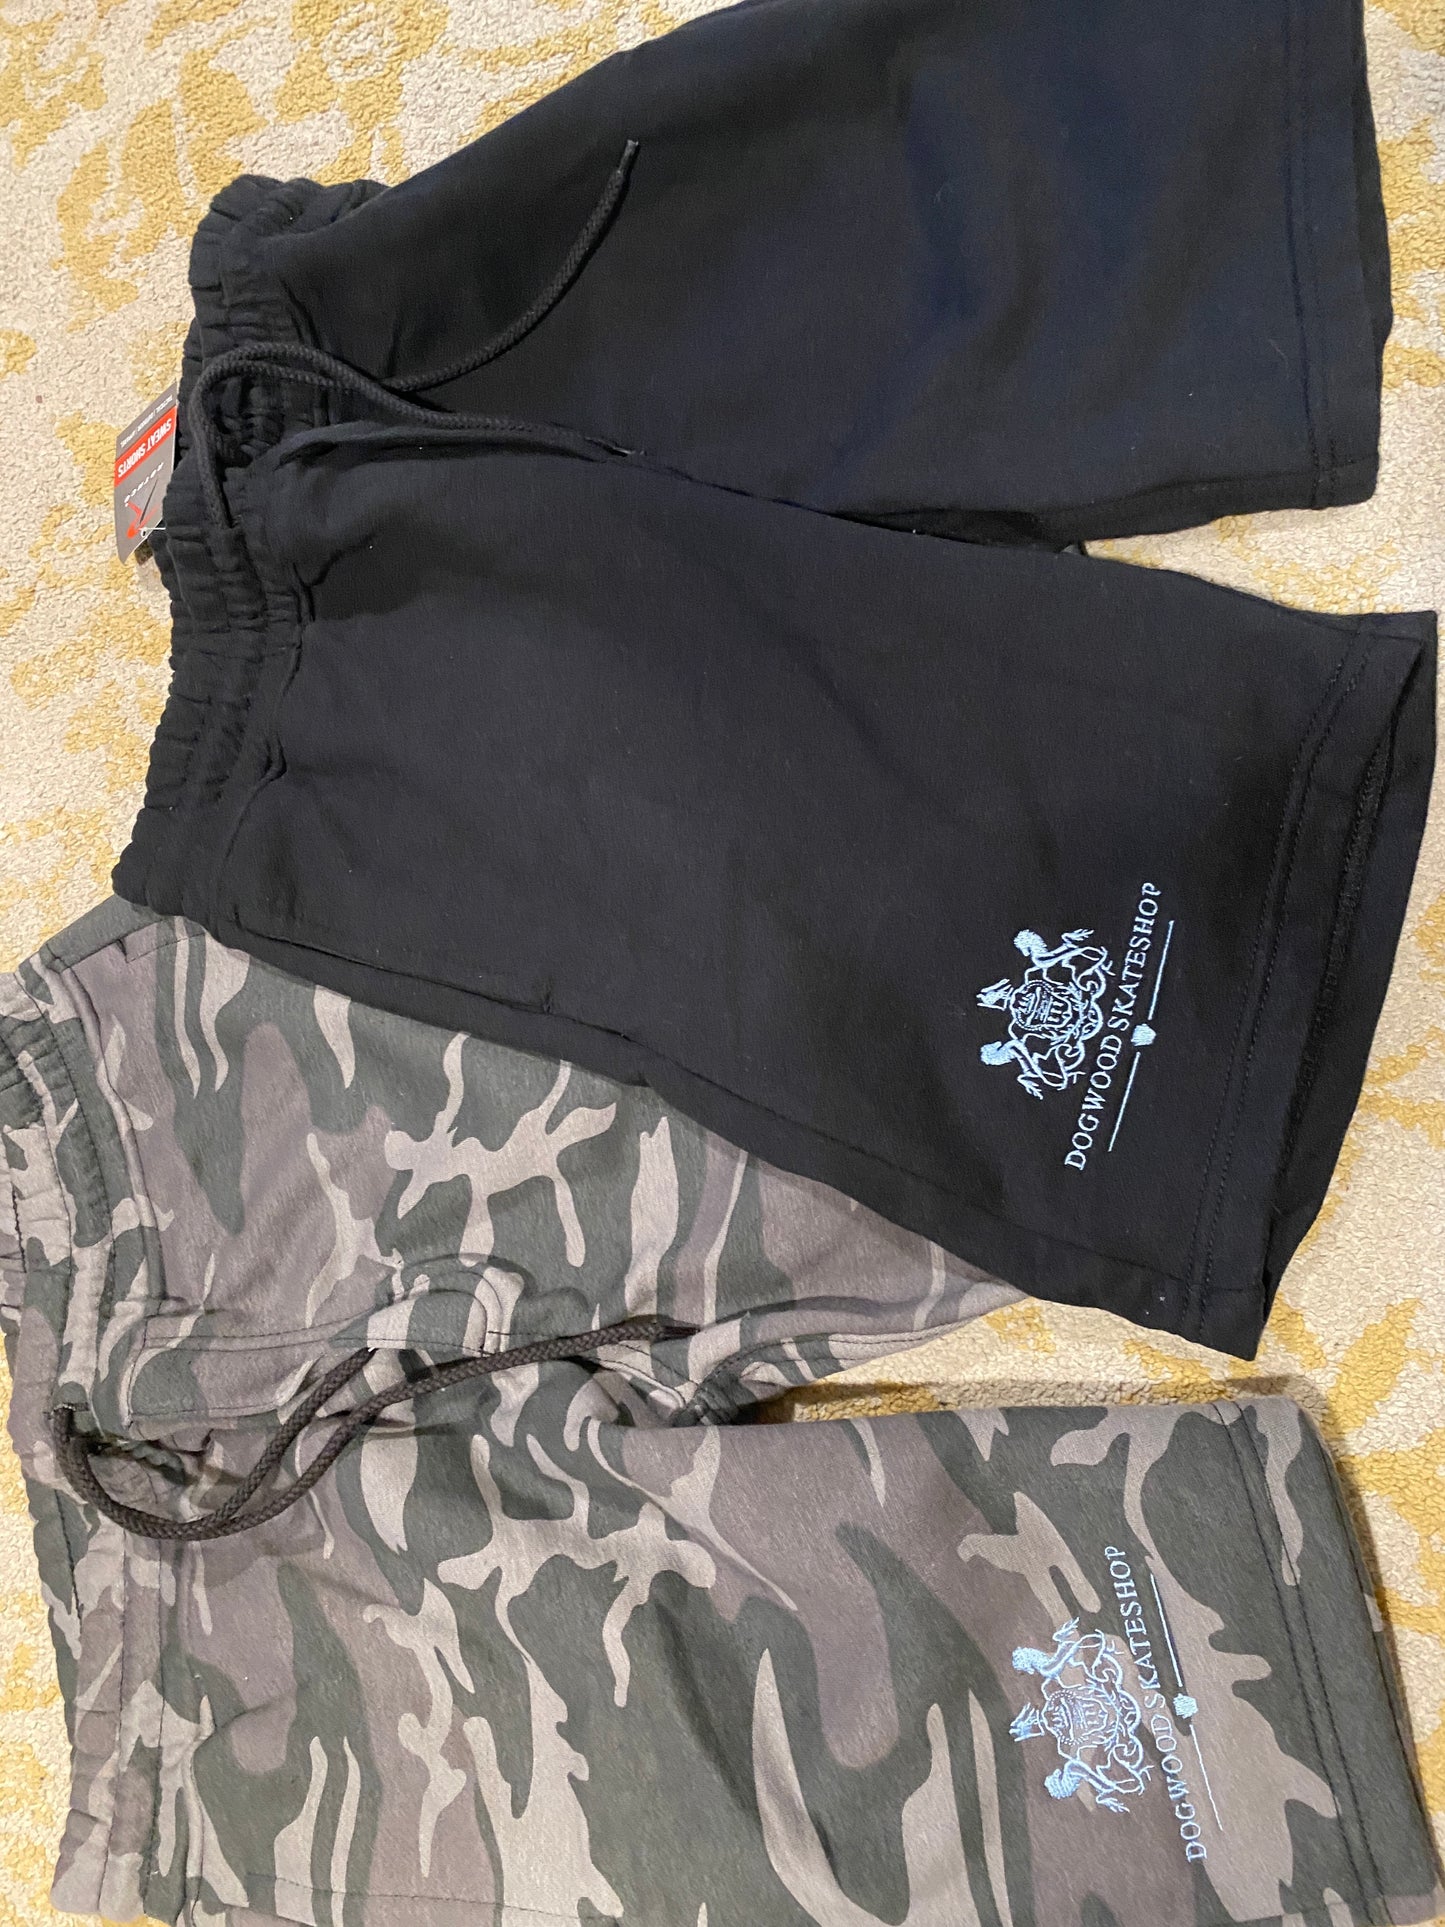 Horses Emb Sweat shorts (size &color options listed)